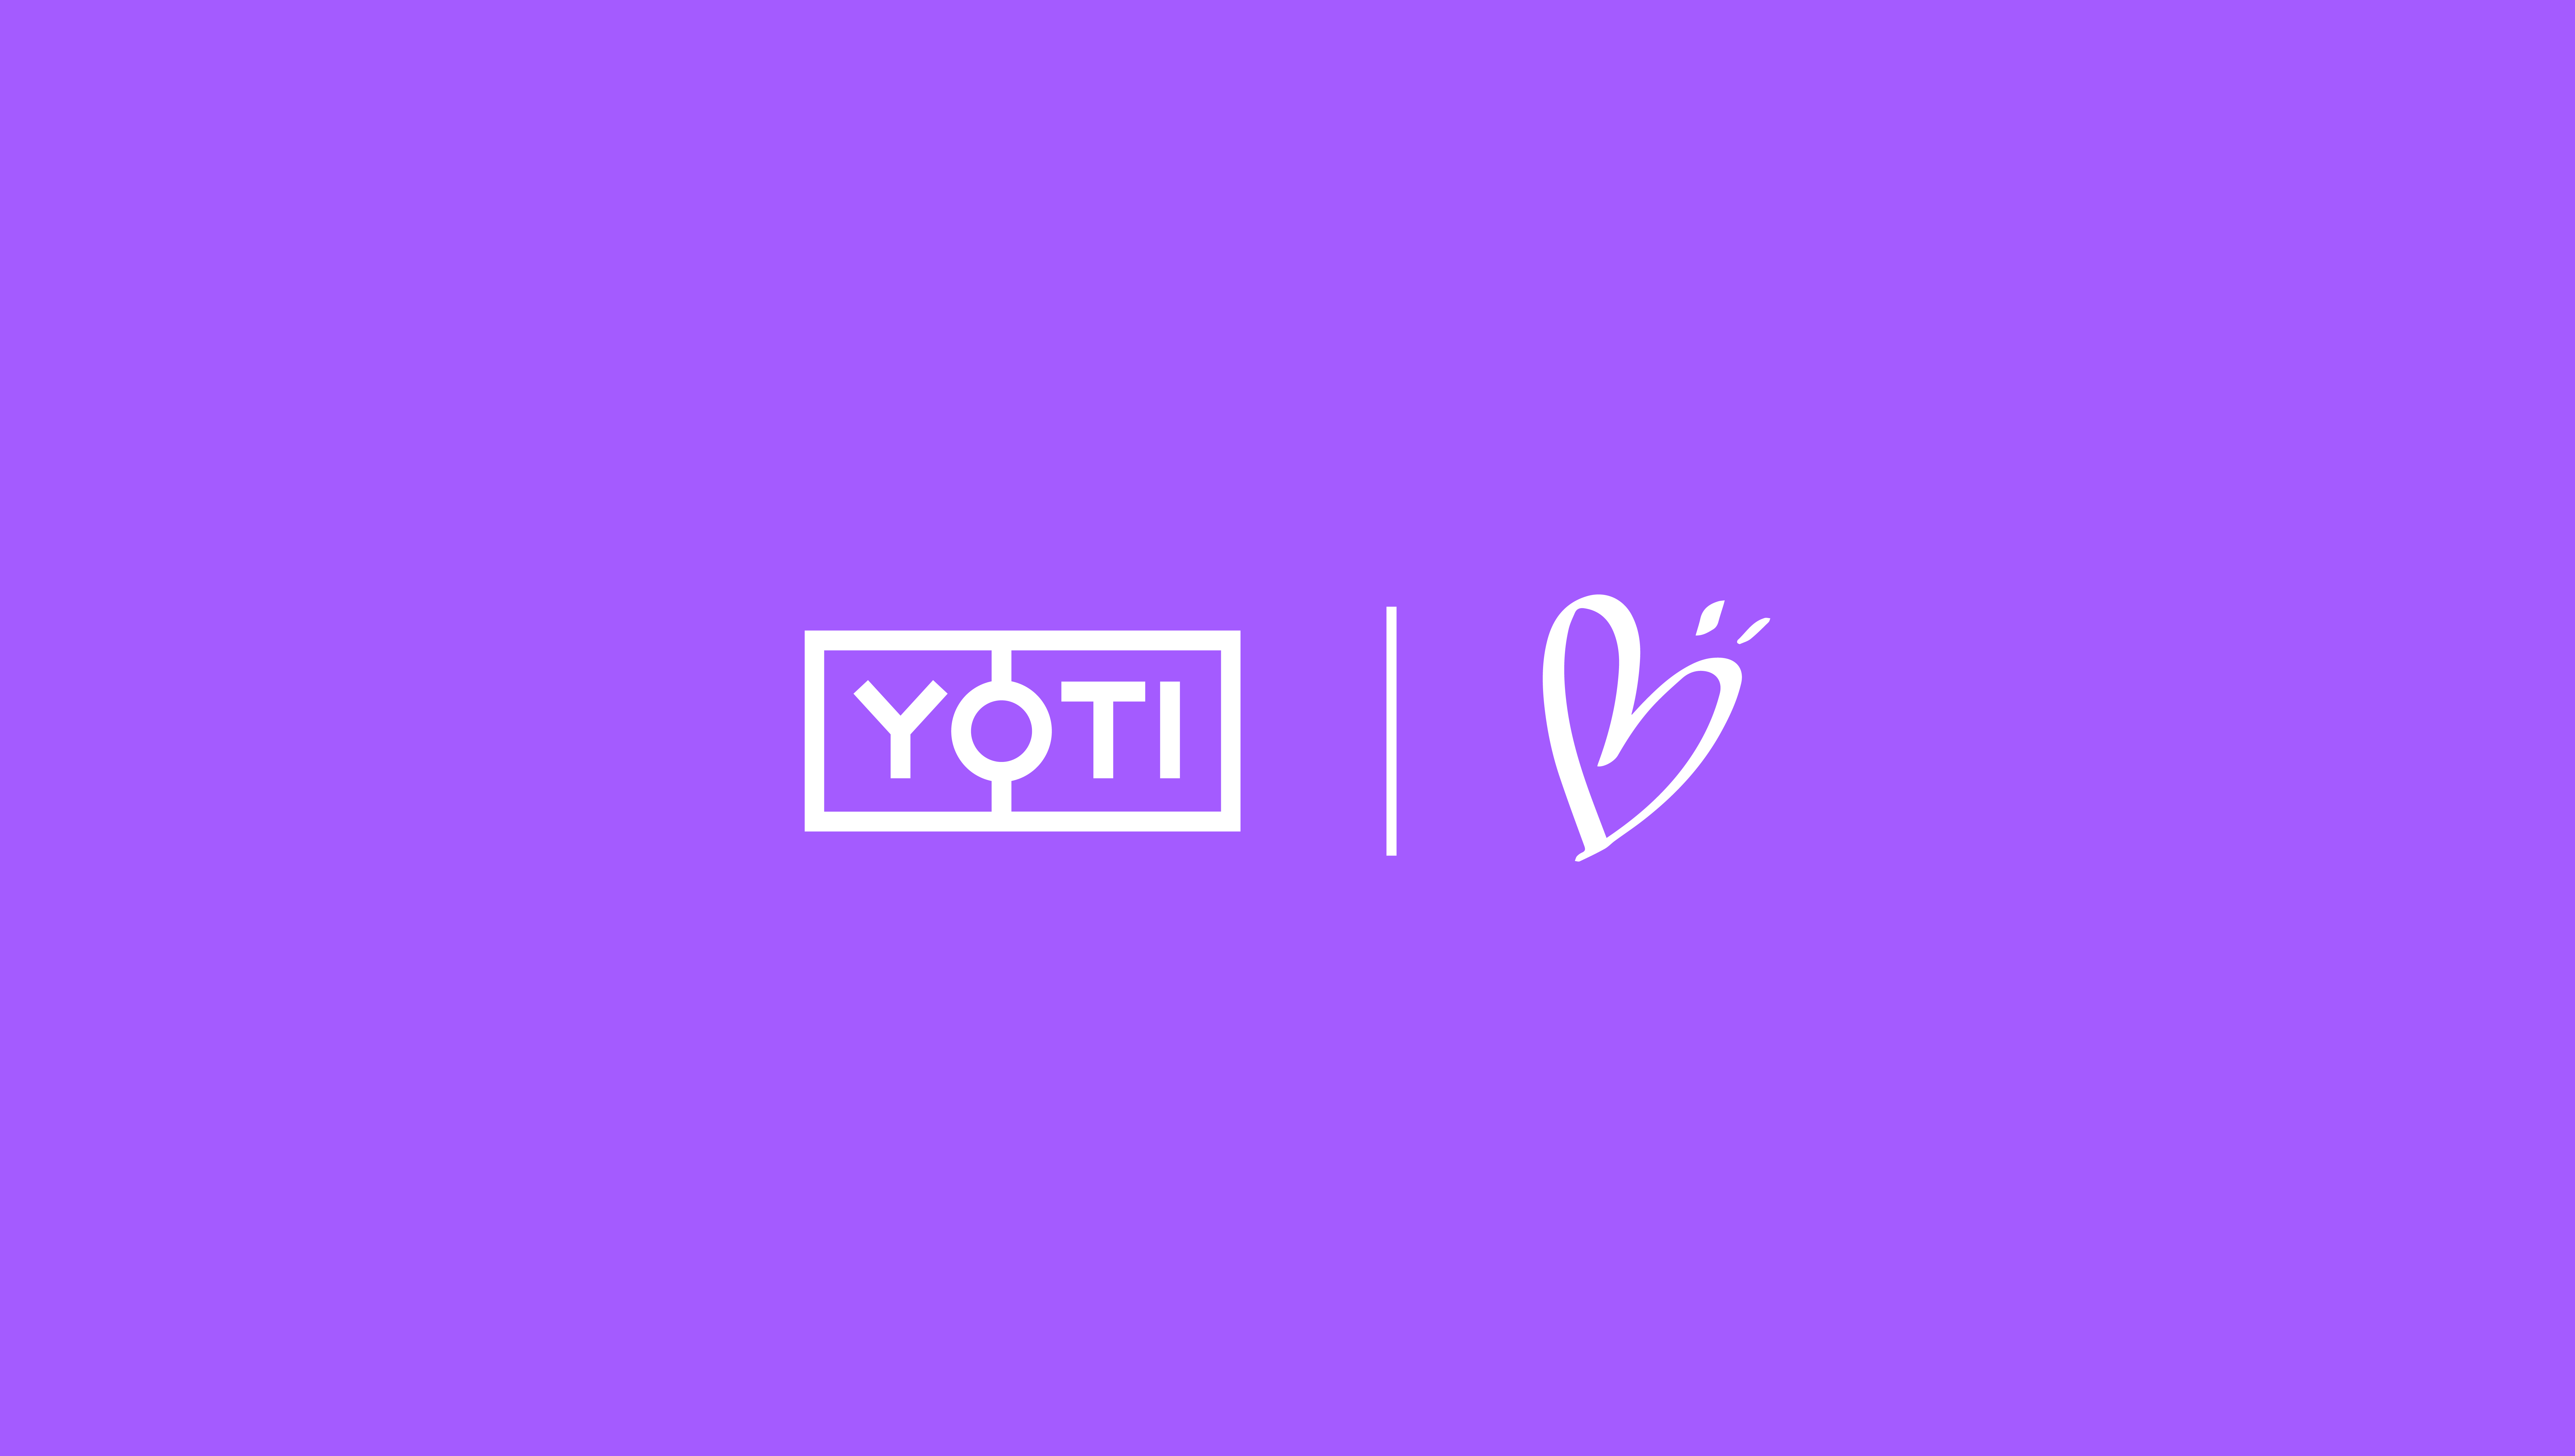 Yoti and Fluttr logos presented together